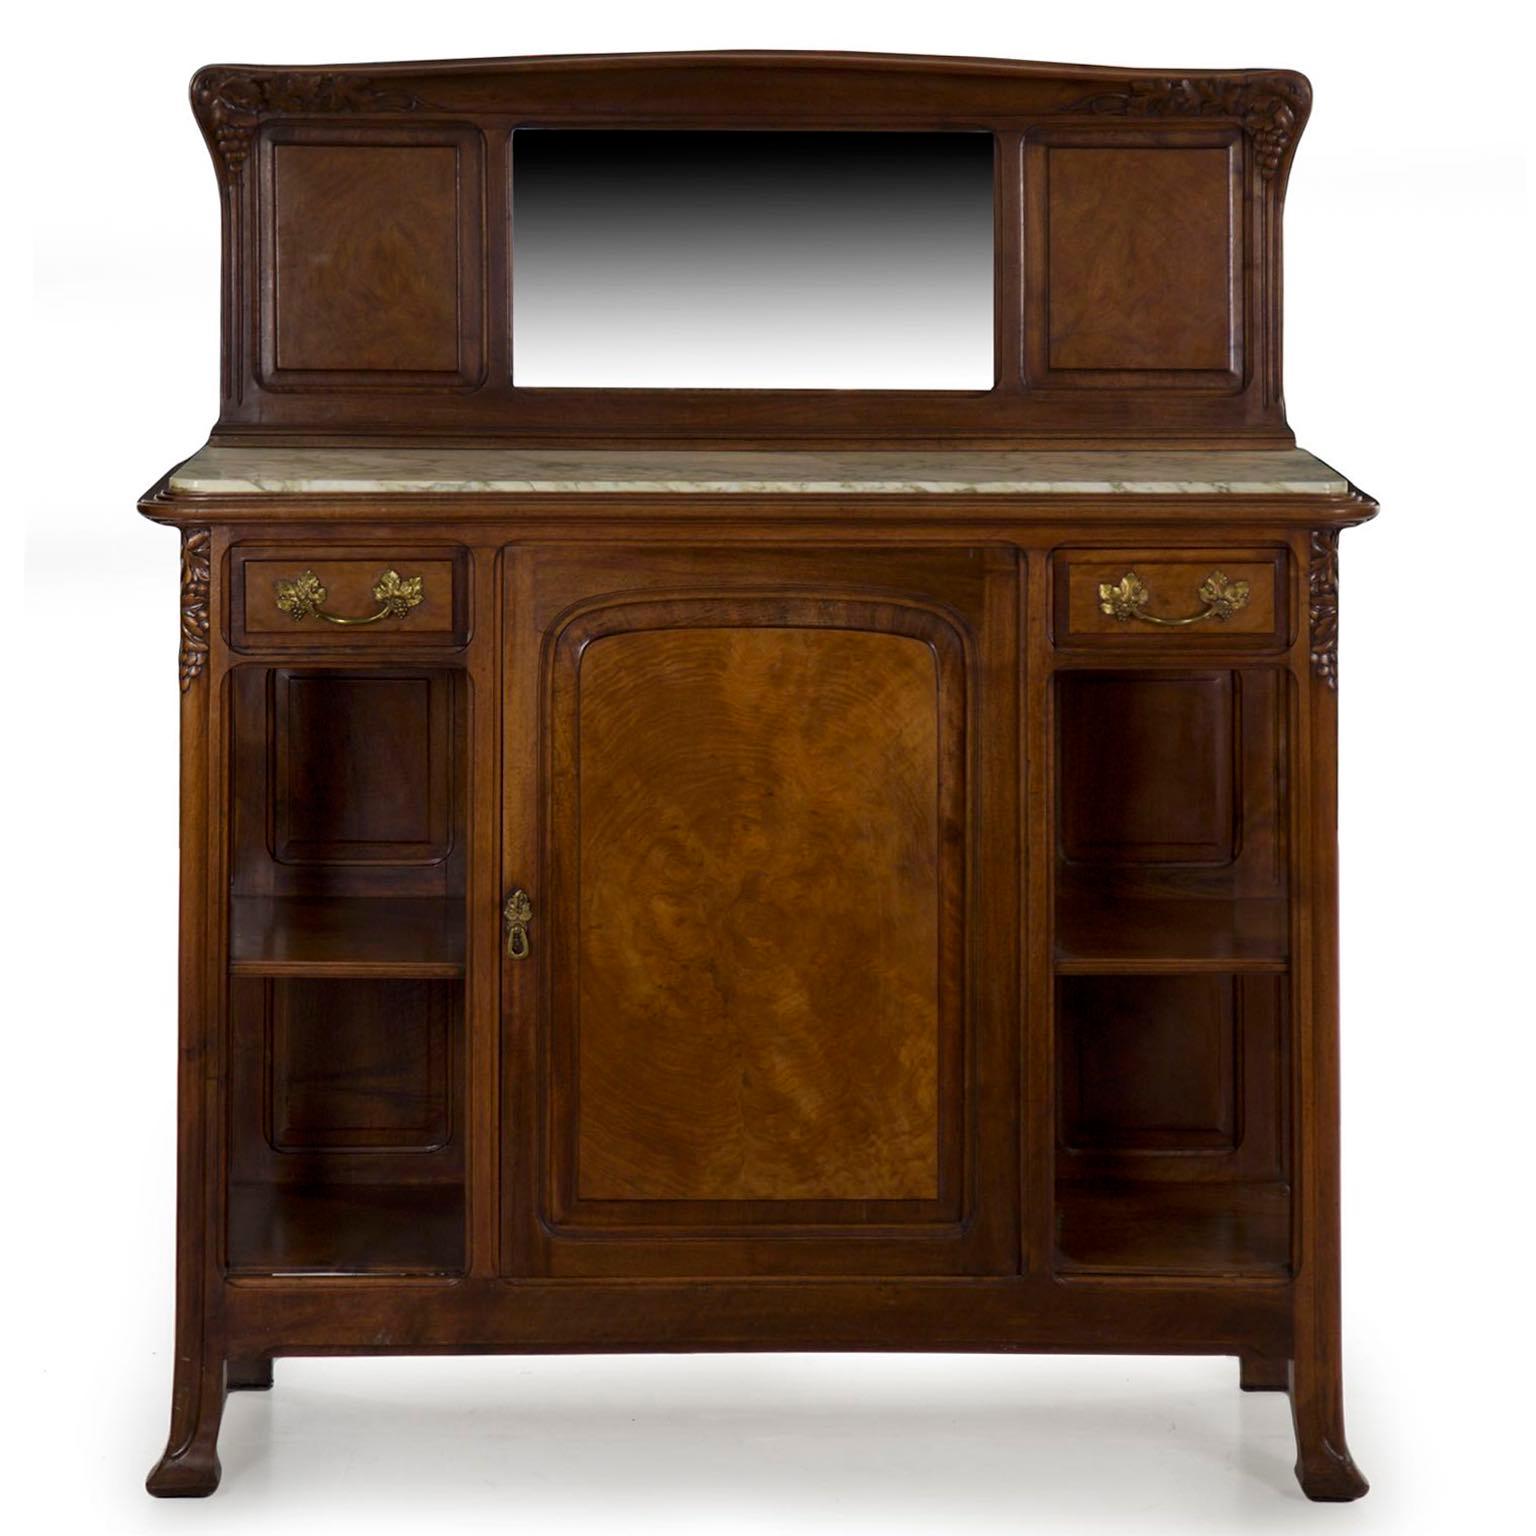 A most striking presentation piece, this server is crafted with a very fine grade of materials throughout; the burl walnut veneers in the door, drawers and panels flanking the mirror are very powerful and well chosen timbers. Where naturalism and